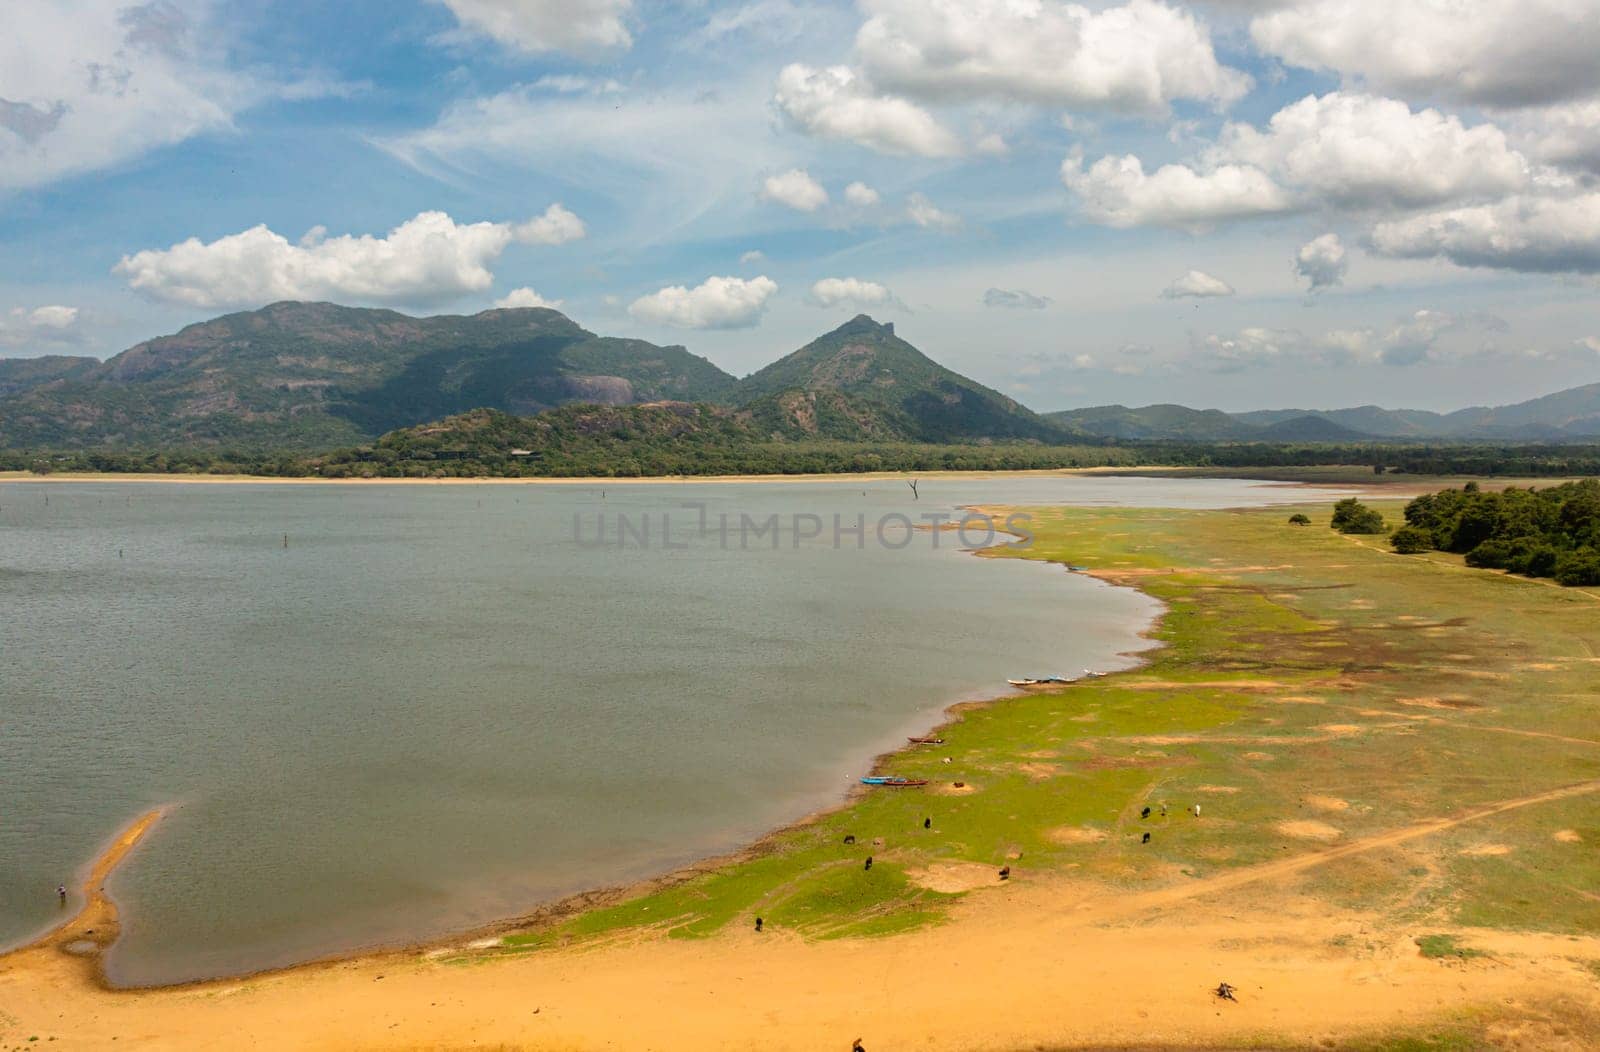 Tropical landscape: A lake in the middle of a forest against the background of mountains. Kandalama Reservoir in Sri Lanka.